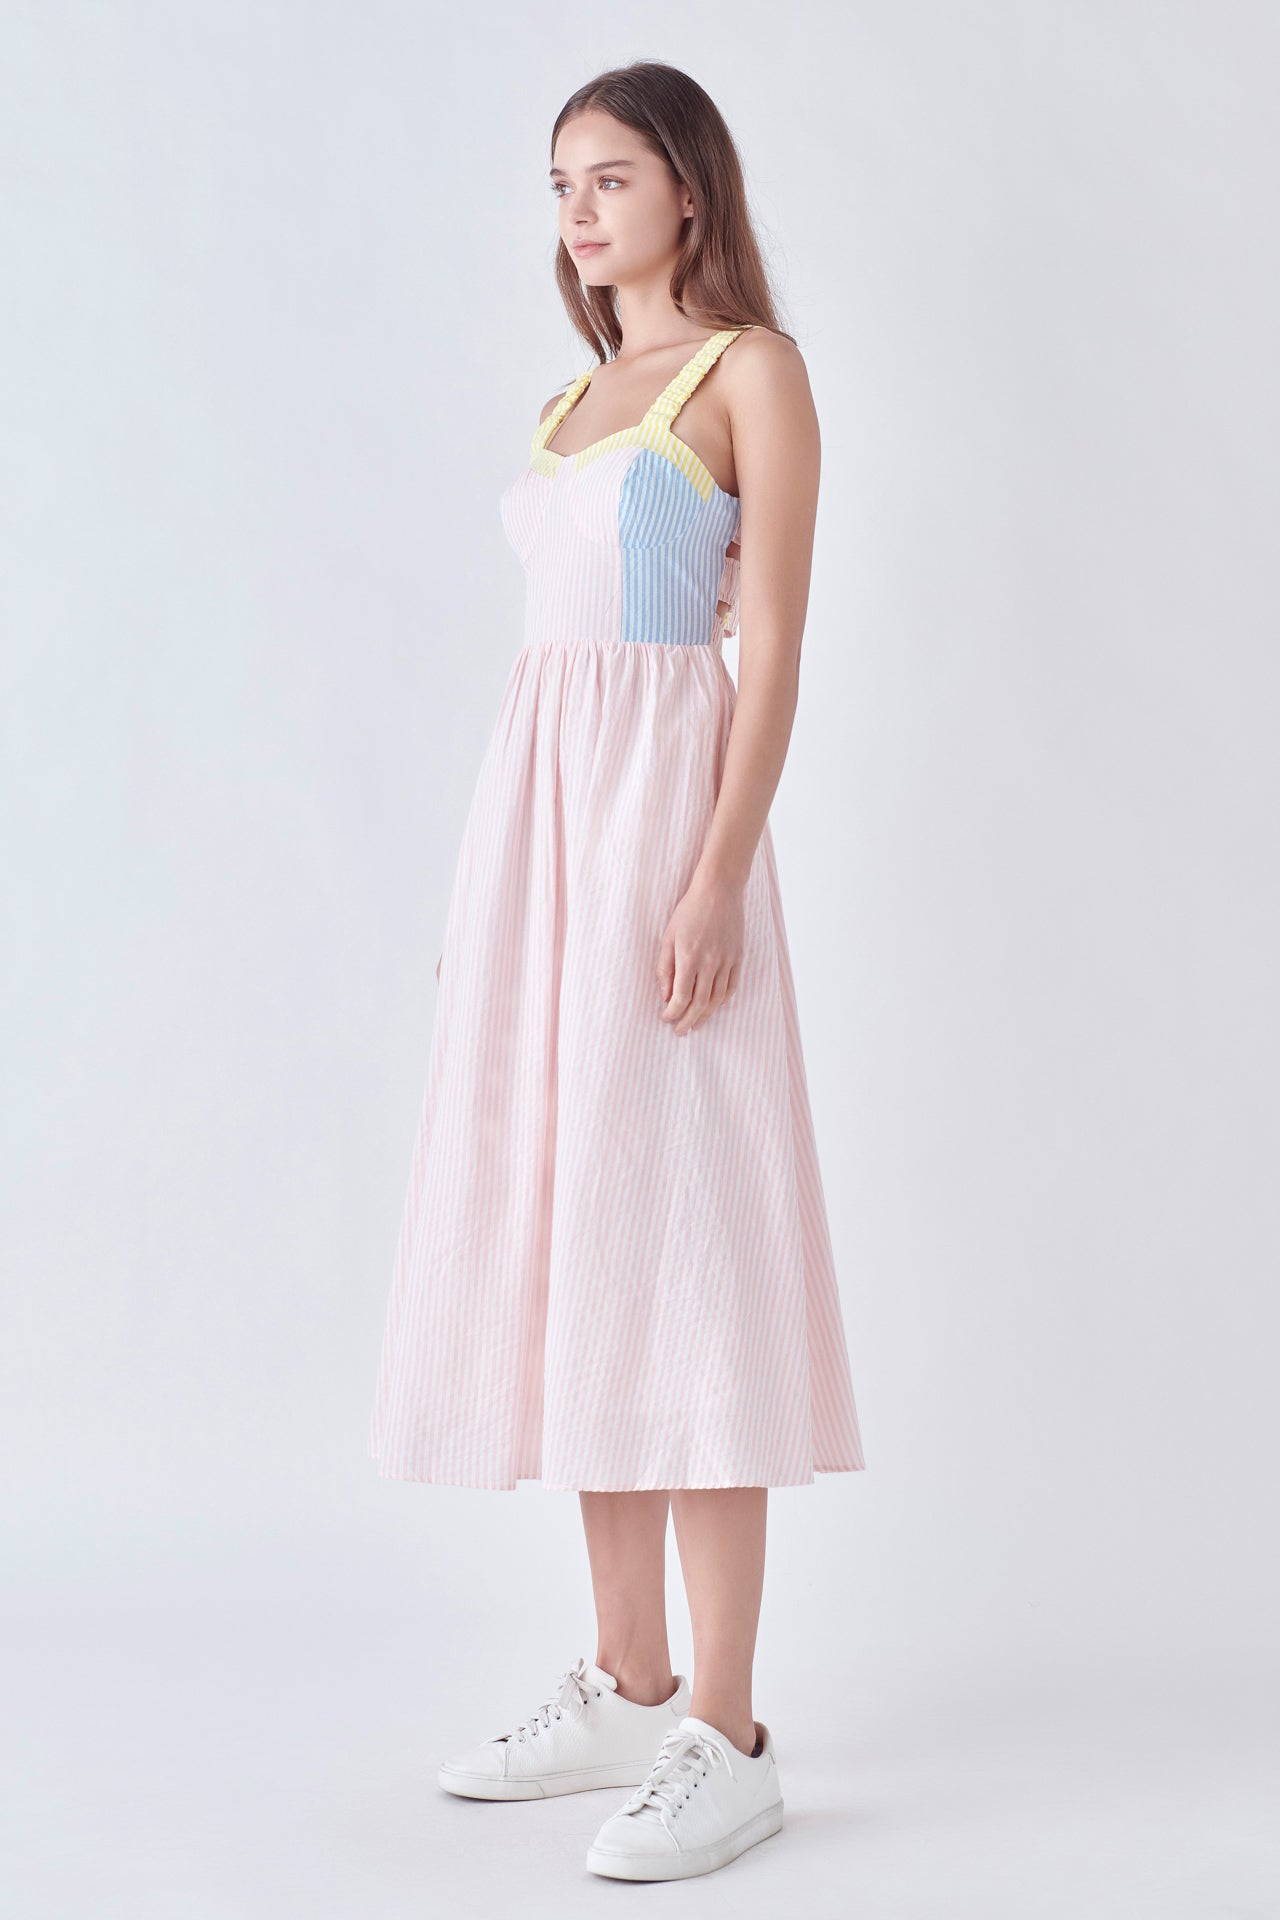 ENGLISH FACTORY - Multi Color Striped Mid Dress - DRESSES available at Objectrare